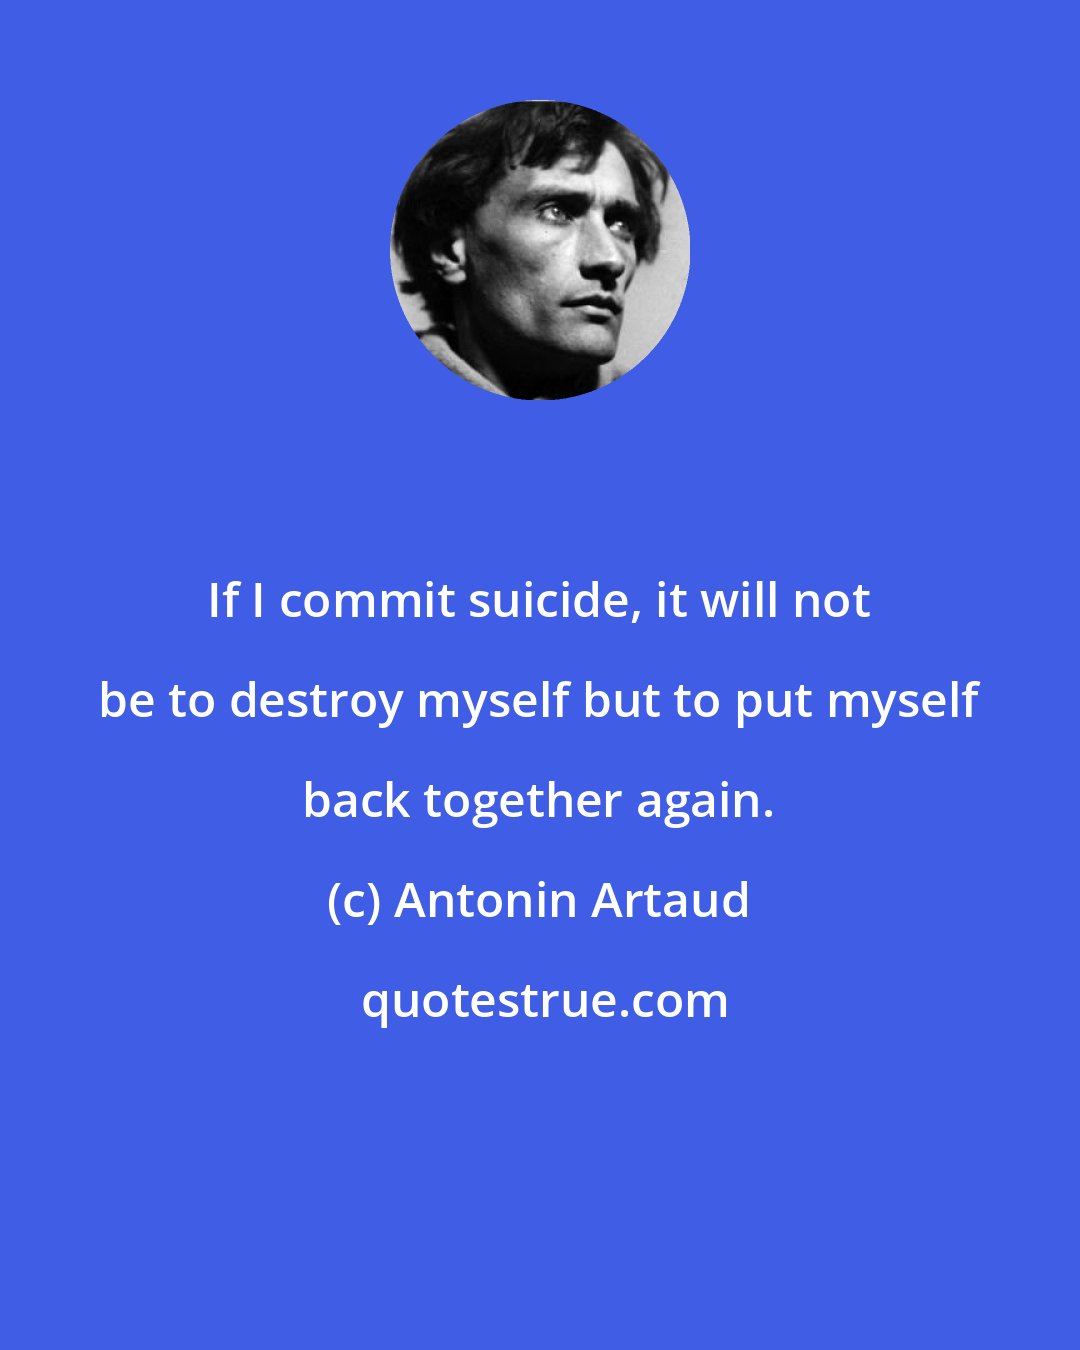 Antonin Artaud: If I commit suicide, it will not be to destroy myself but to put myself back together again.